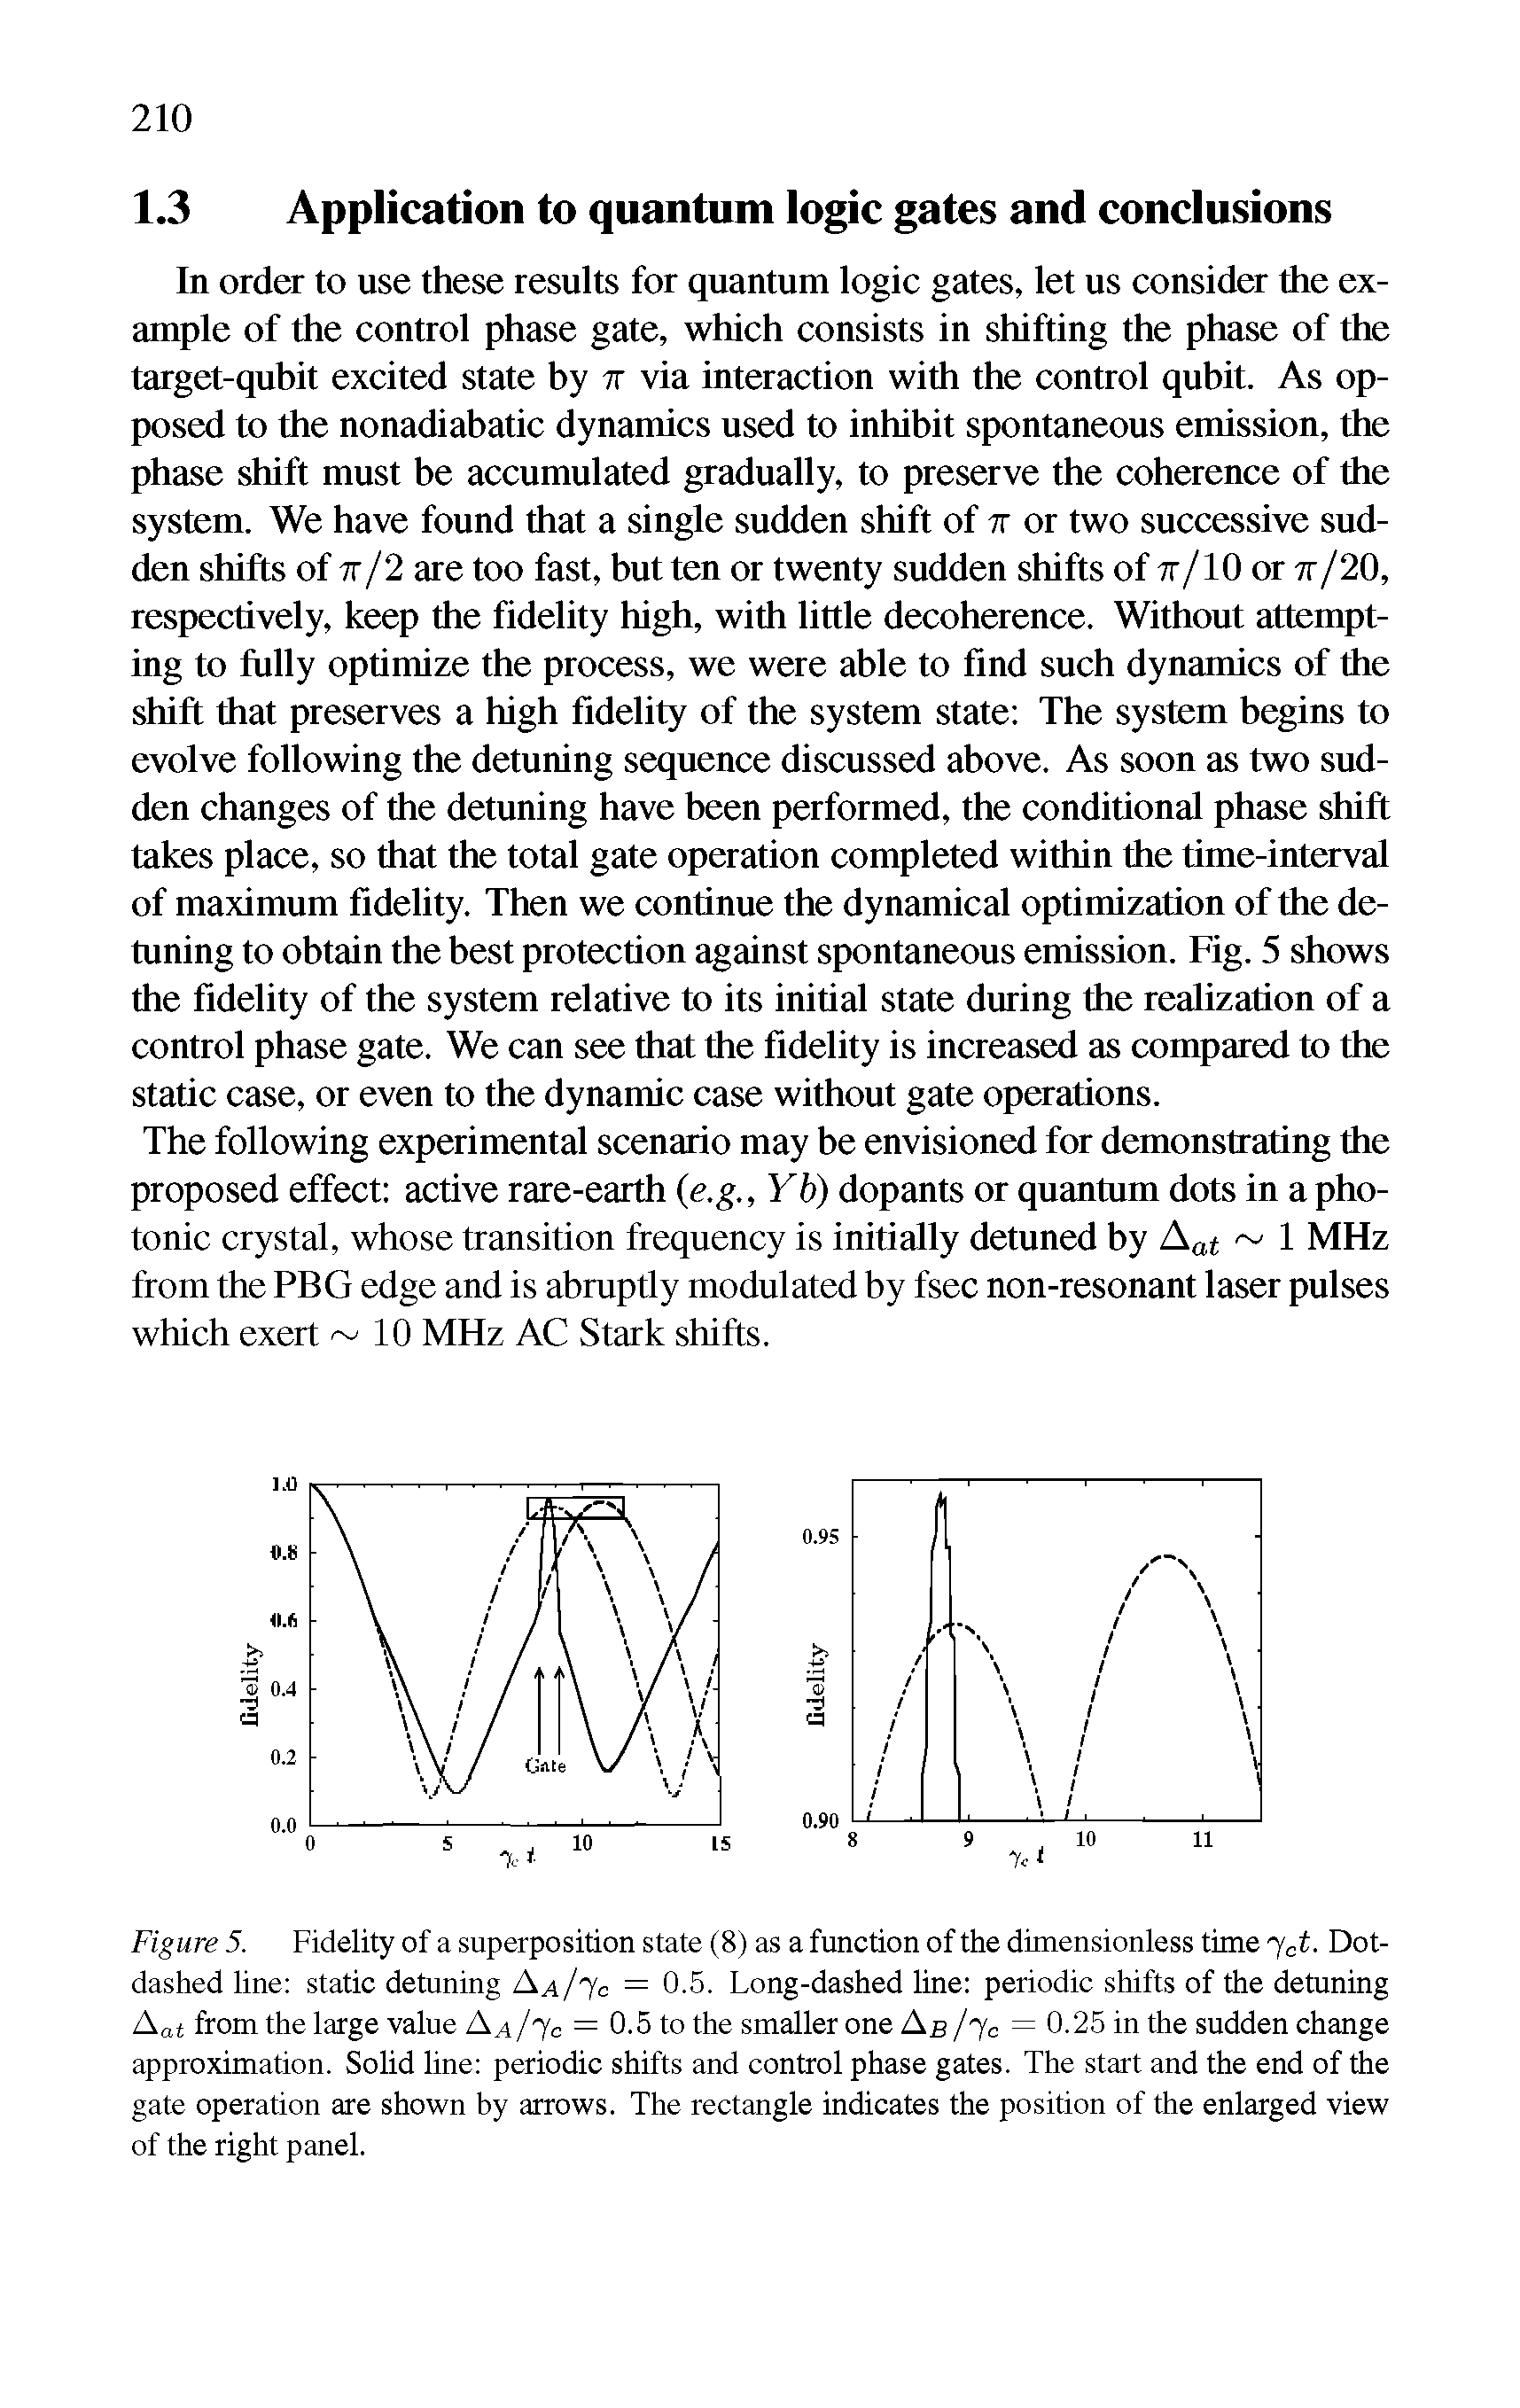 Figure 5. Fidelity of a superposition state (8) as a function of the dimensionless time 7ct. Dot-dashed line static detuning Aa/7c = 0.5. Long-dashed line periodic shifts of the detuning A at from the large value A a/7c = 0.5 to the smaller one As /7c = 0.25 in the sudden change approximation. Solid line periodic shifts and control phase gates. The start and the end of the gate operation are shown by arrows. The rectangle indicates the position of the enlarged view of the right panel.